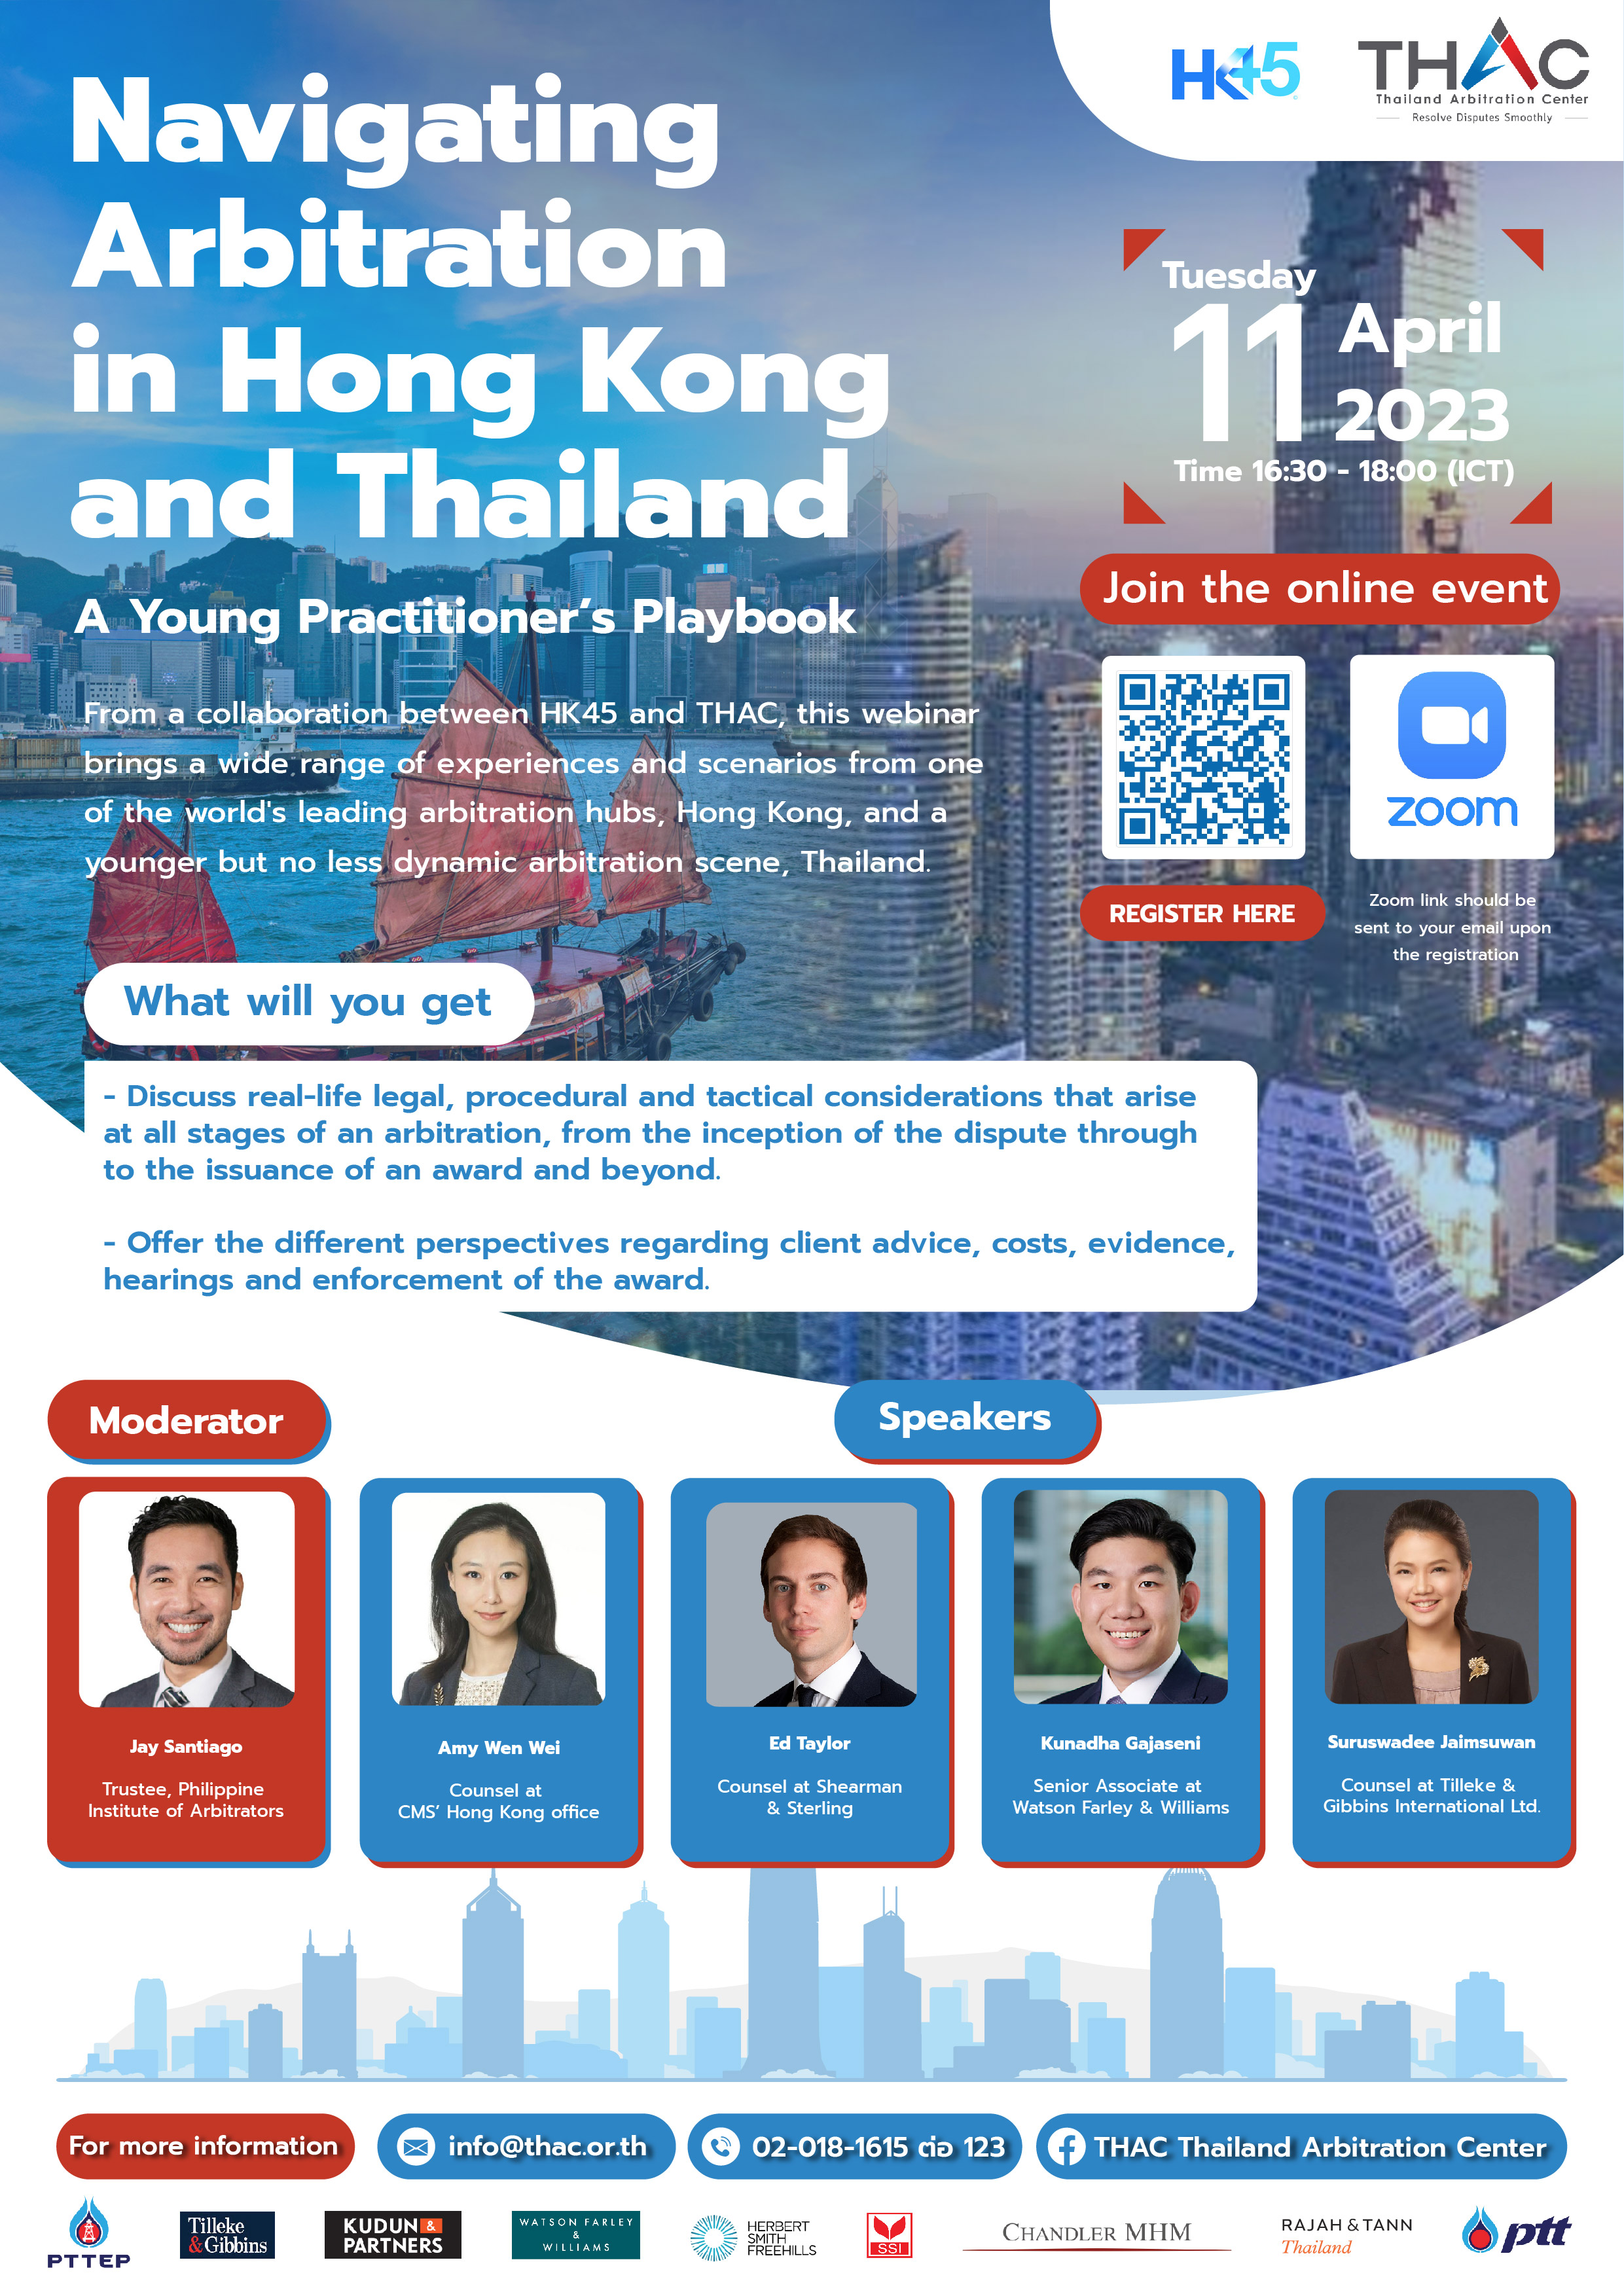 Navigating Arbitration in Hong Kong and Thailand: A Young Practitioner’s Playbook